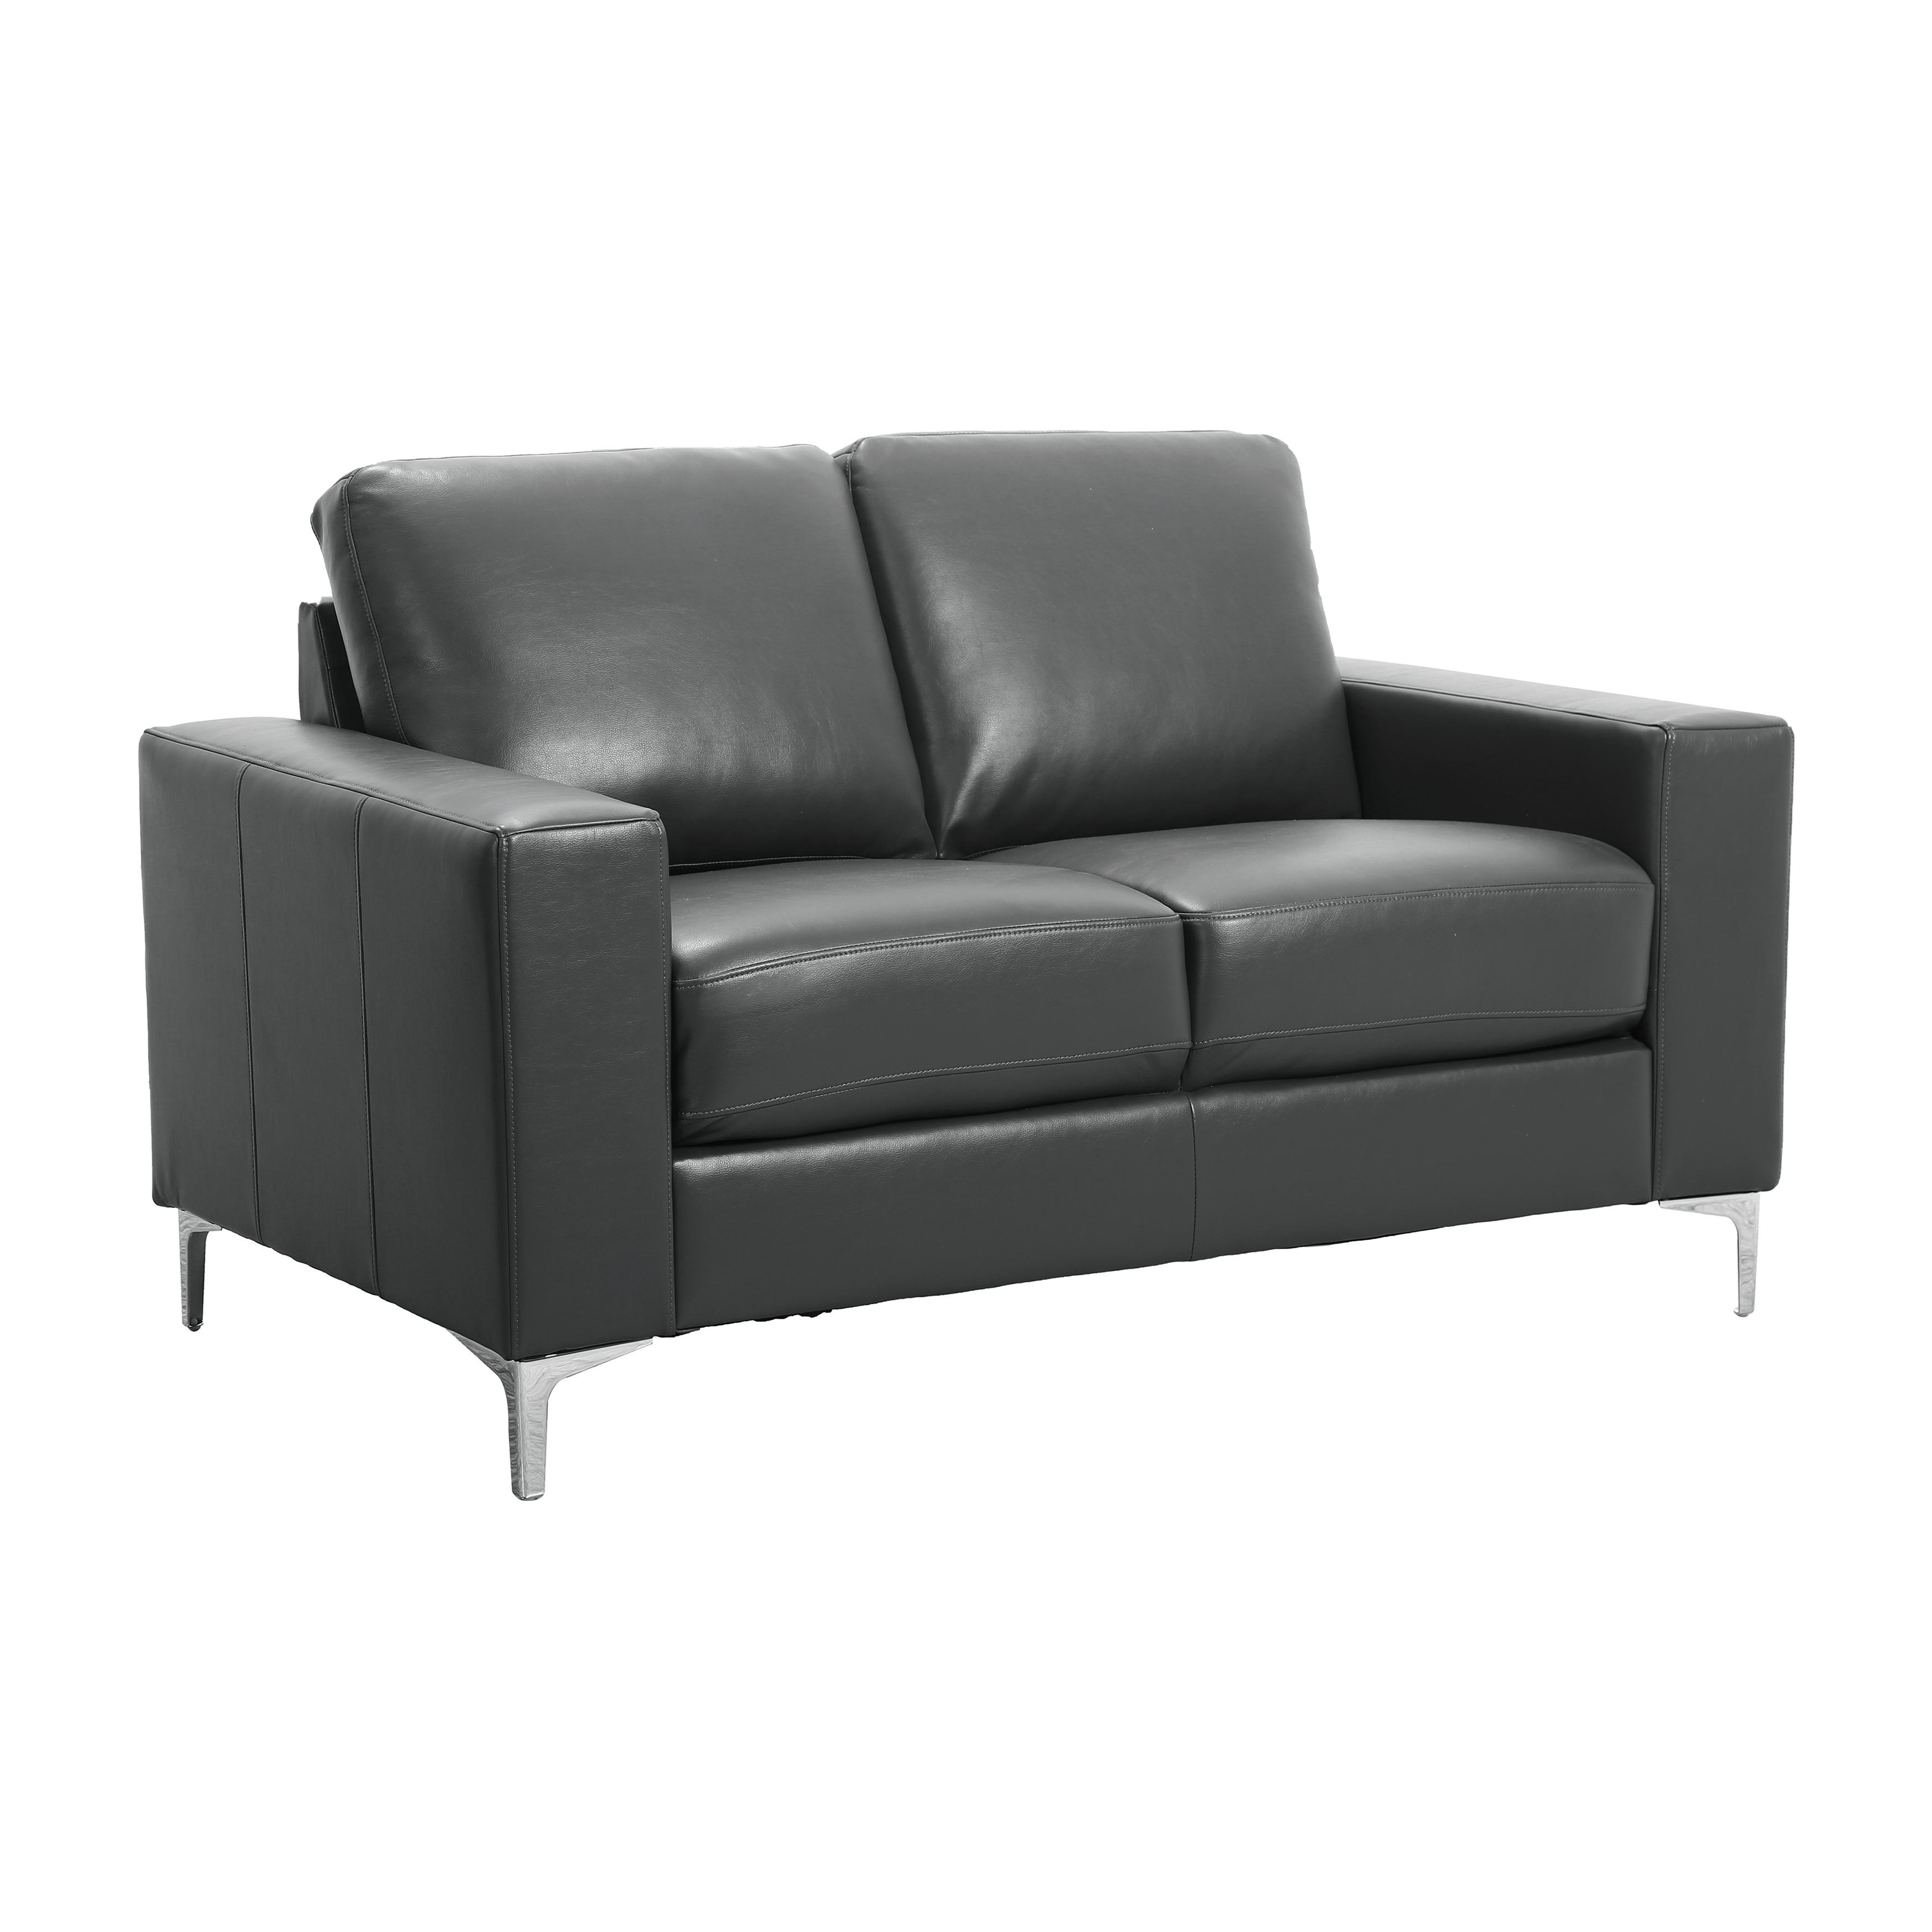 

    
Contemporary Gray Faux Leather Loveseat Homelegance 8203GY-2 Iniko
